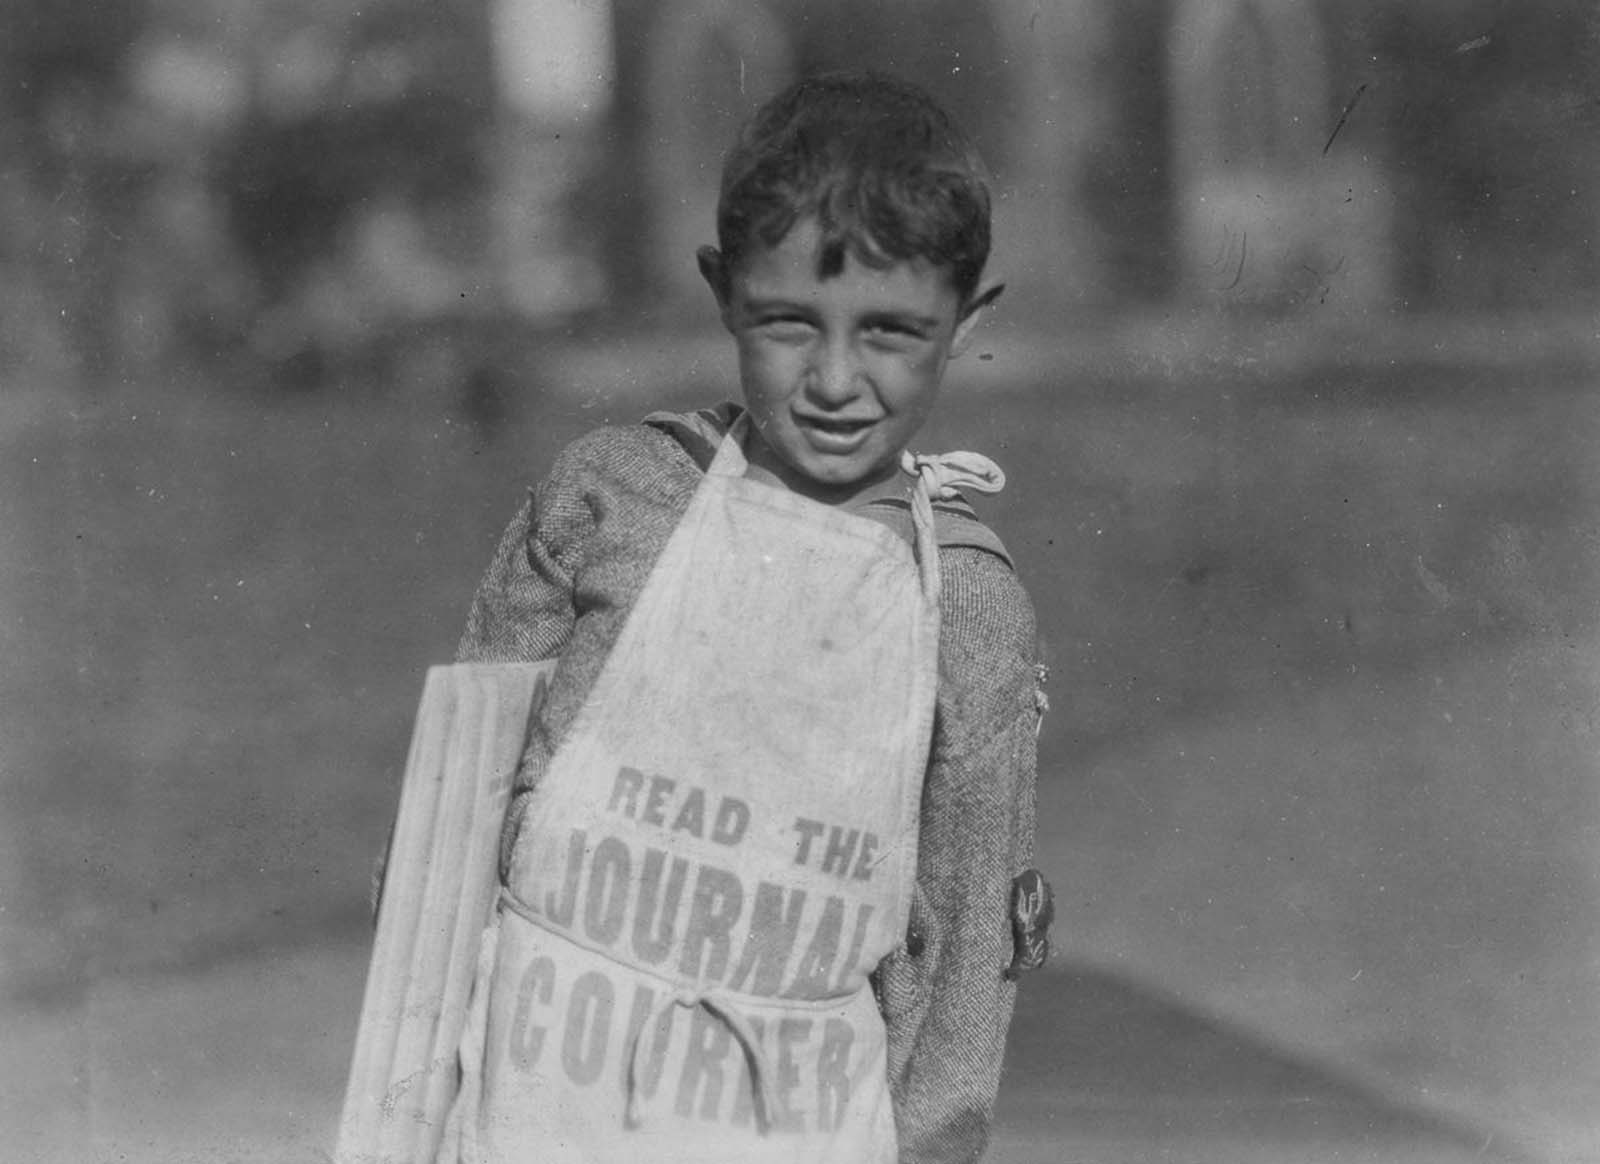 Another young newsboy. Hartford, Connecticut, 1924.